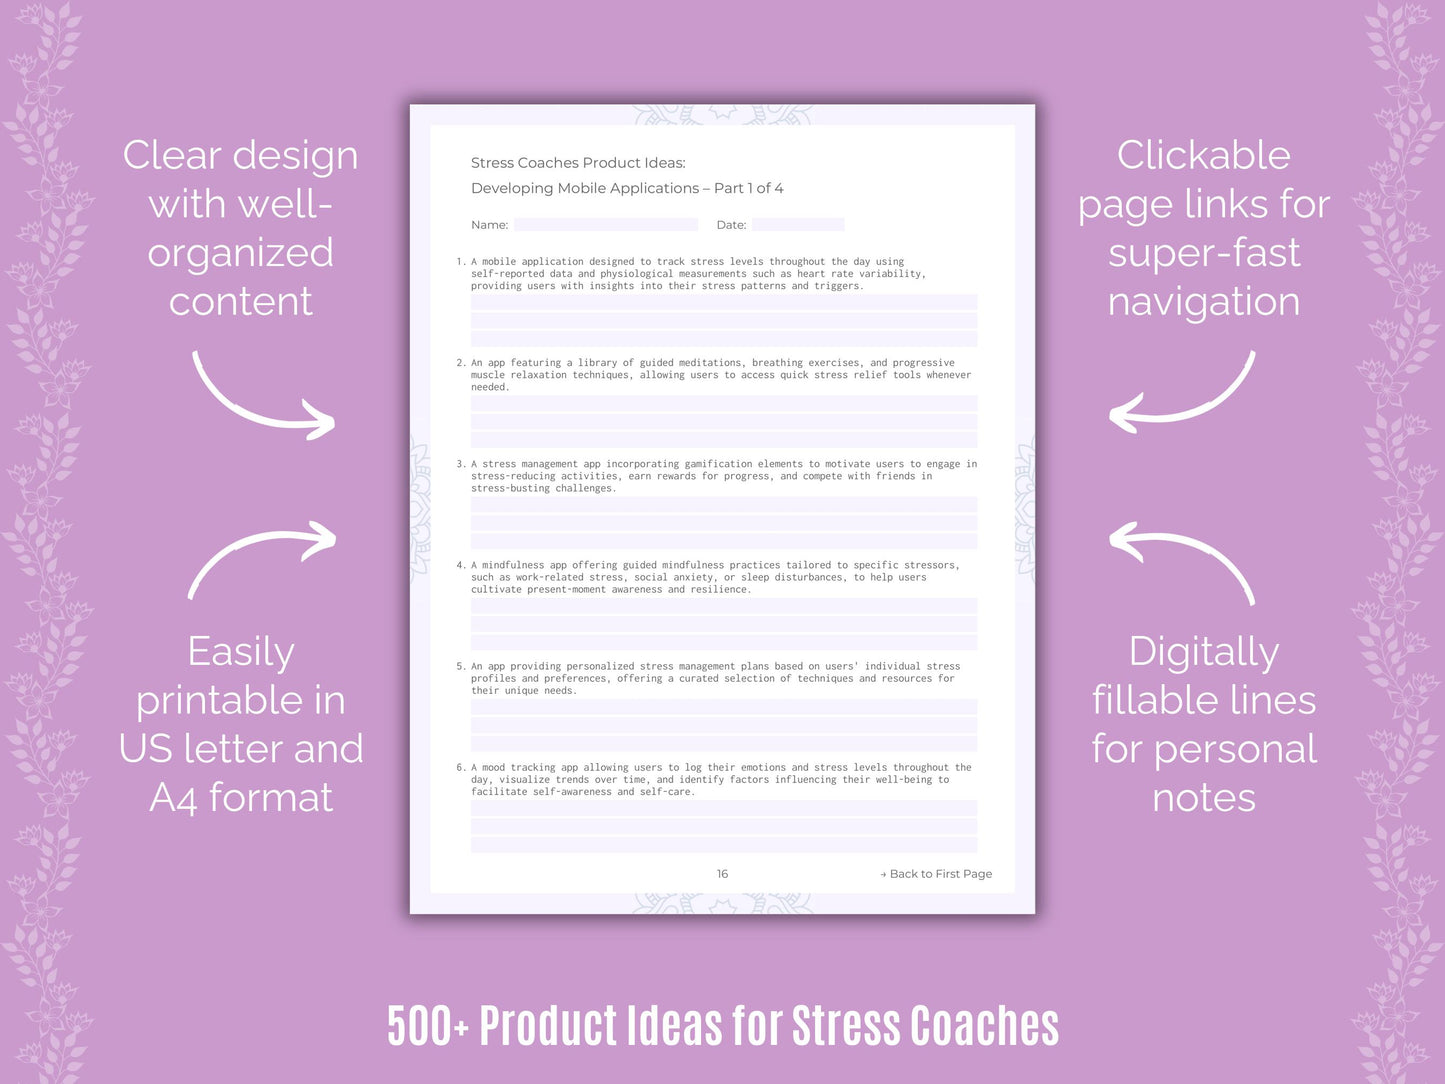 Stress Coaches Product Ideas Resource